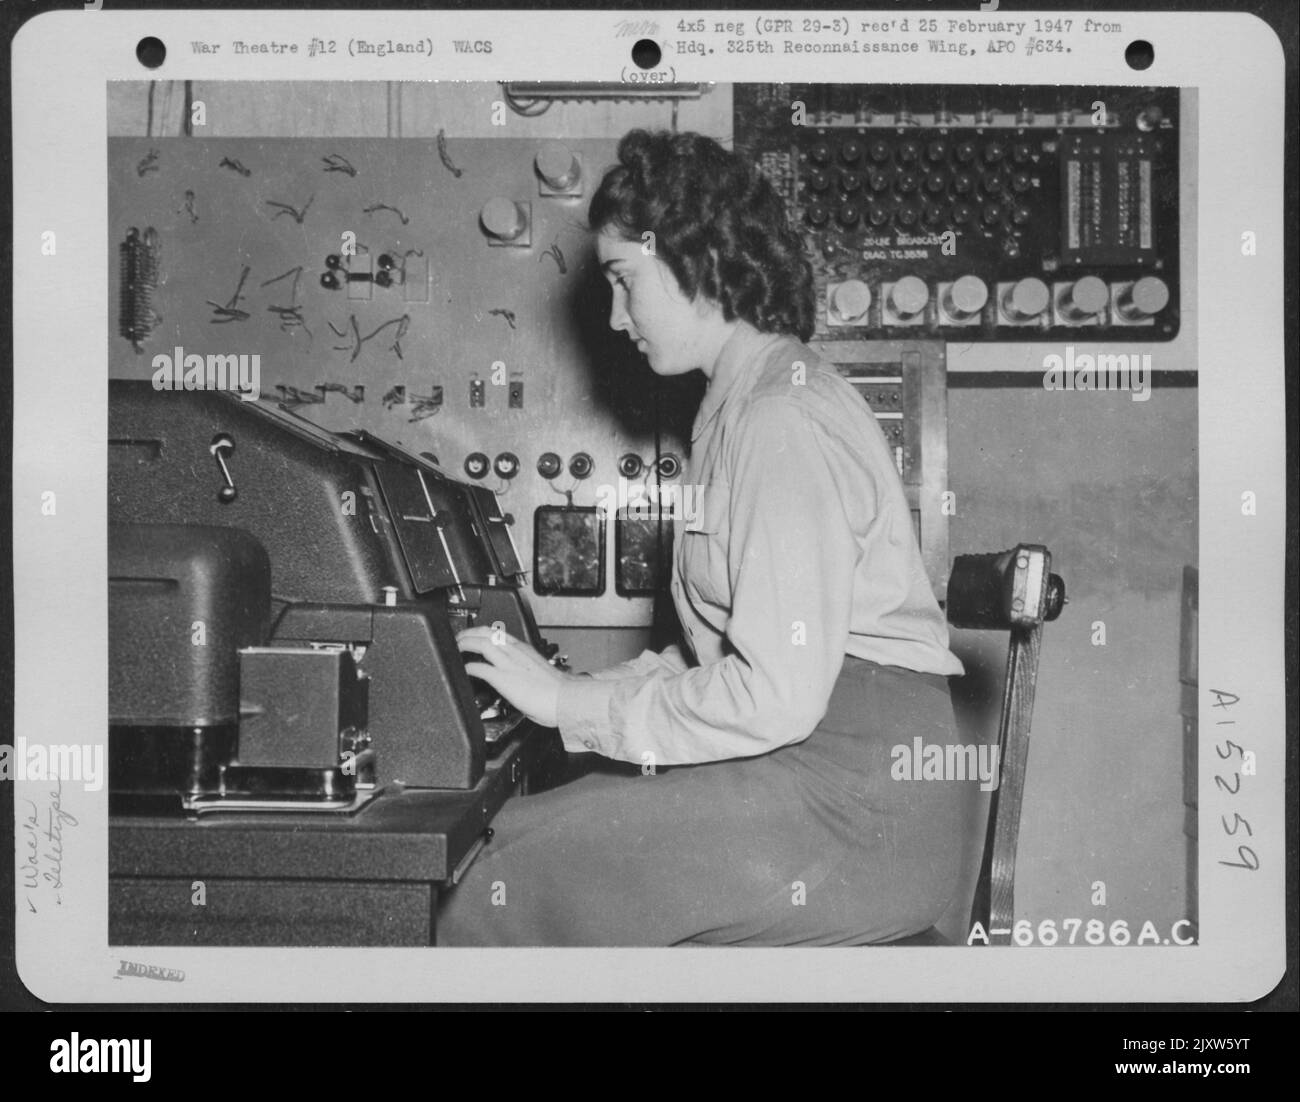 Wac Of The Viii Bomber Command Operates A Teletype Machine. England, 13 September 1943. Stock Photo